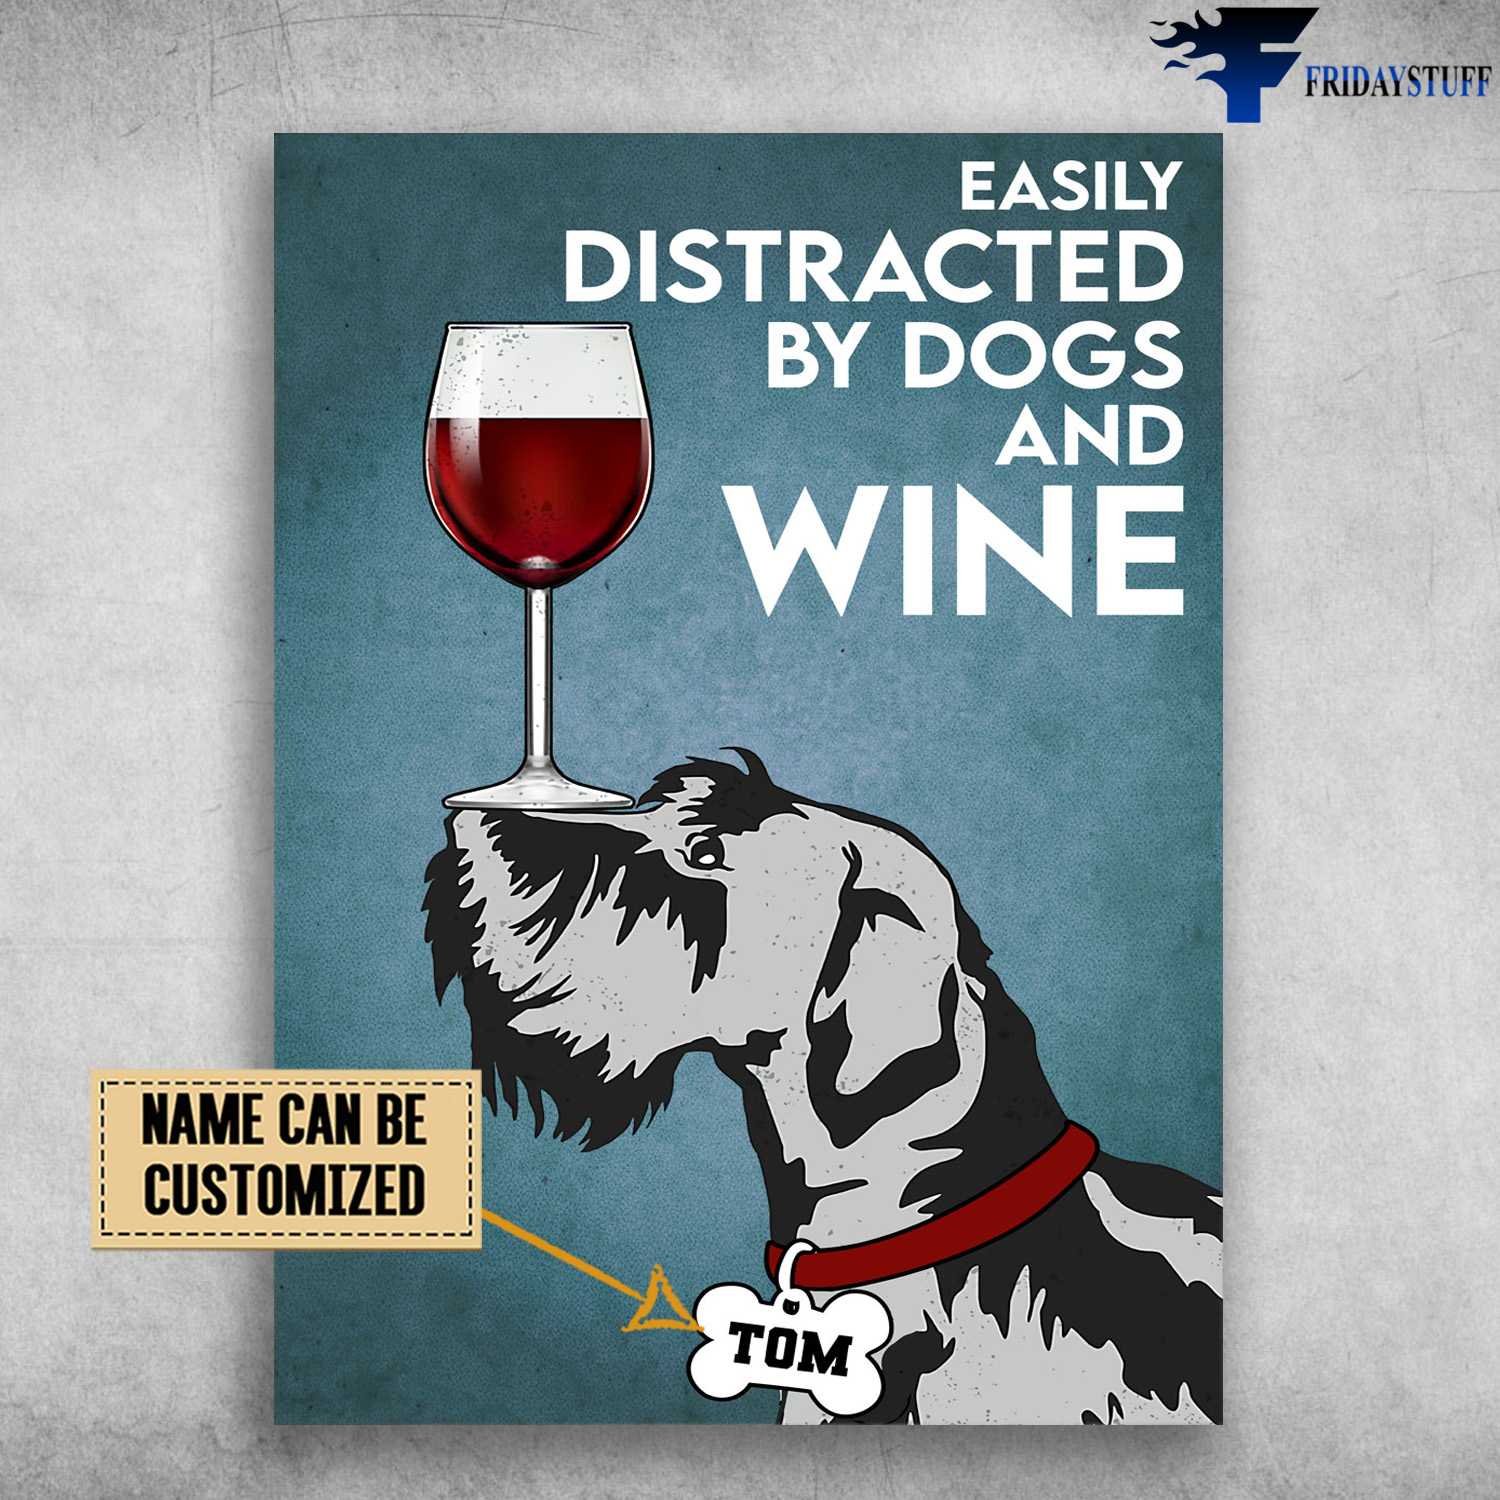 Dog Lover, Schnauzer Dog, Dog And Wine, Easily Distracted By Dogs And Wine